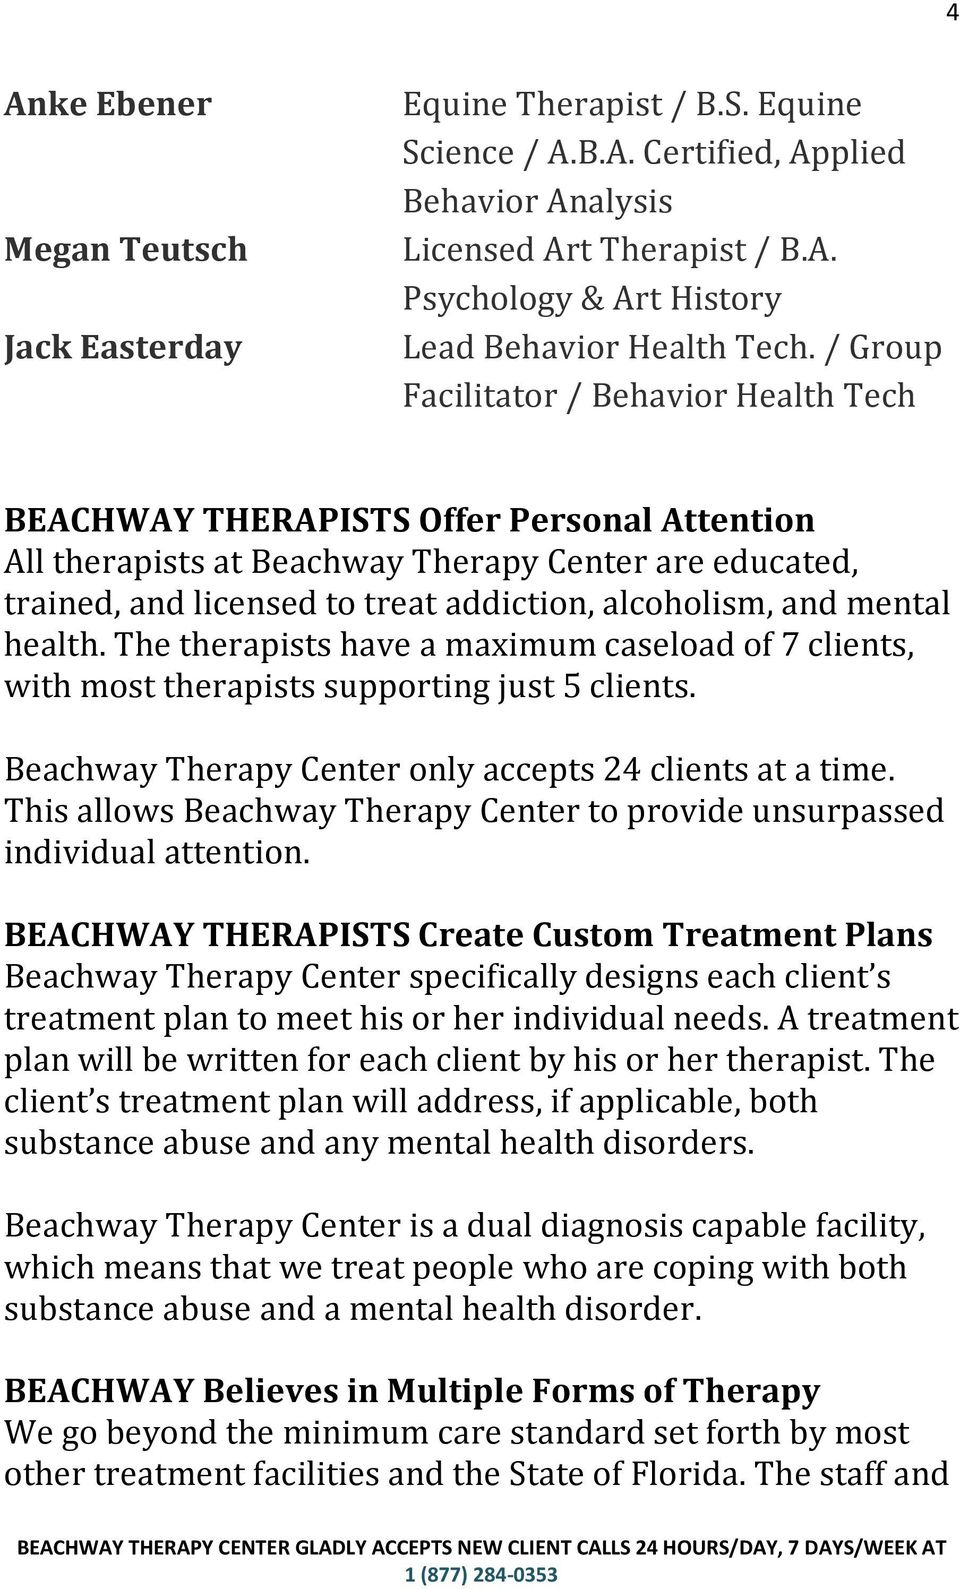 and mental health. The therapists have a maximum caseload of 7 clients, with most therapists supporting just 5 clients. Beachway Therapy Center only accepts 24 clients at a time.